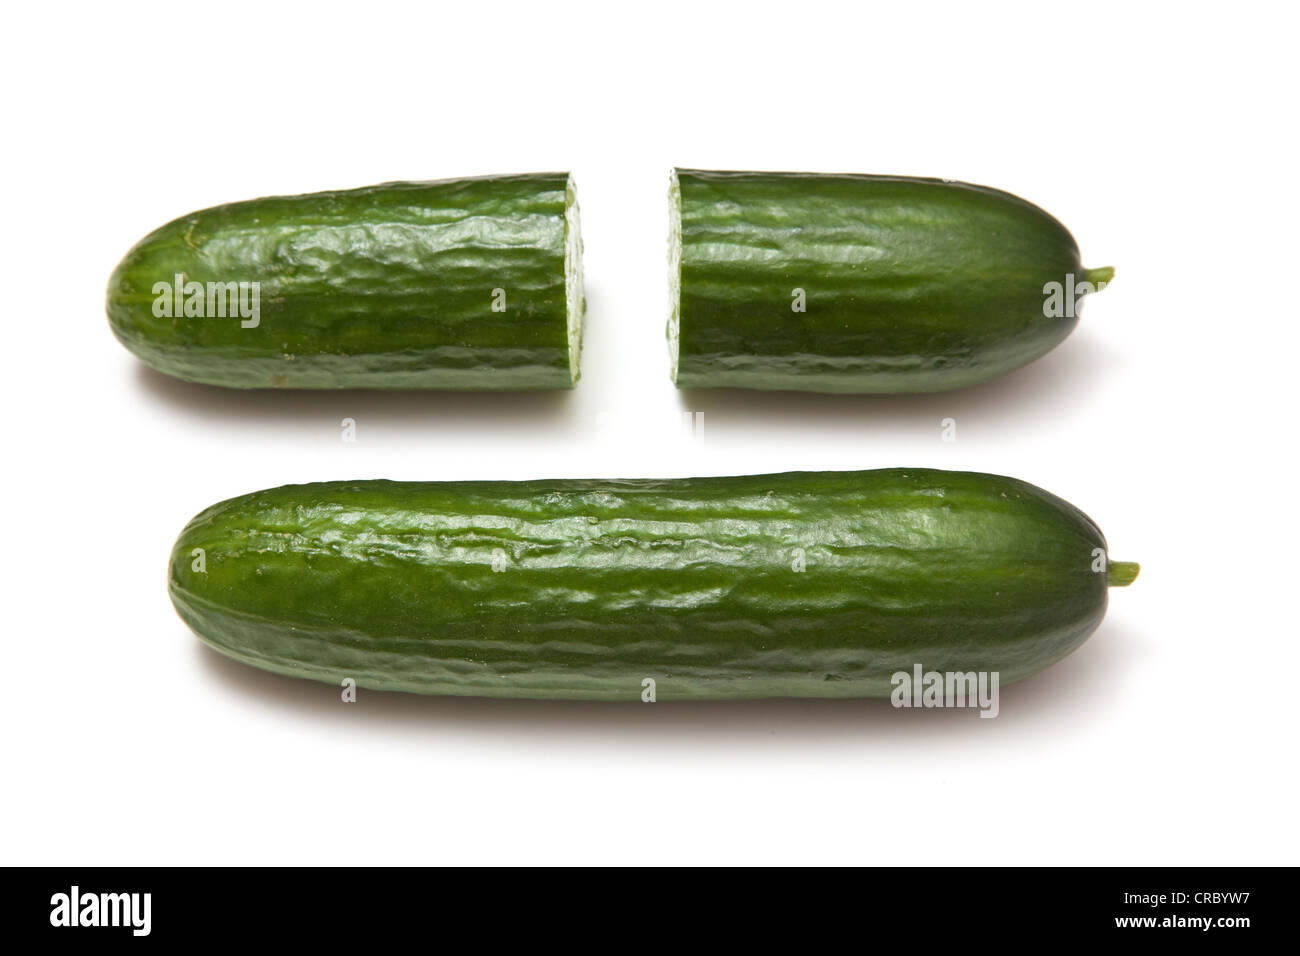 https://c8.alamy.com/comp/CRBYW7/mini-cucumbers-isolated-on-a-white-studio-background-CRBYW7.jpg